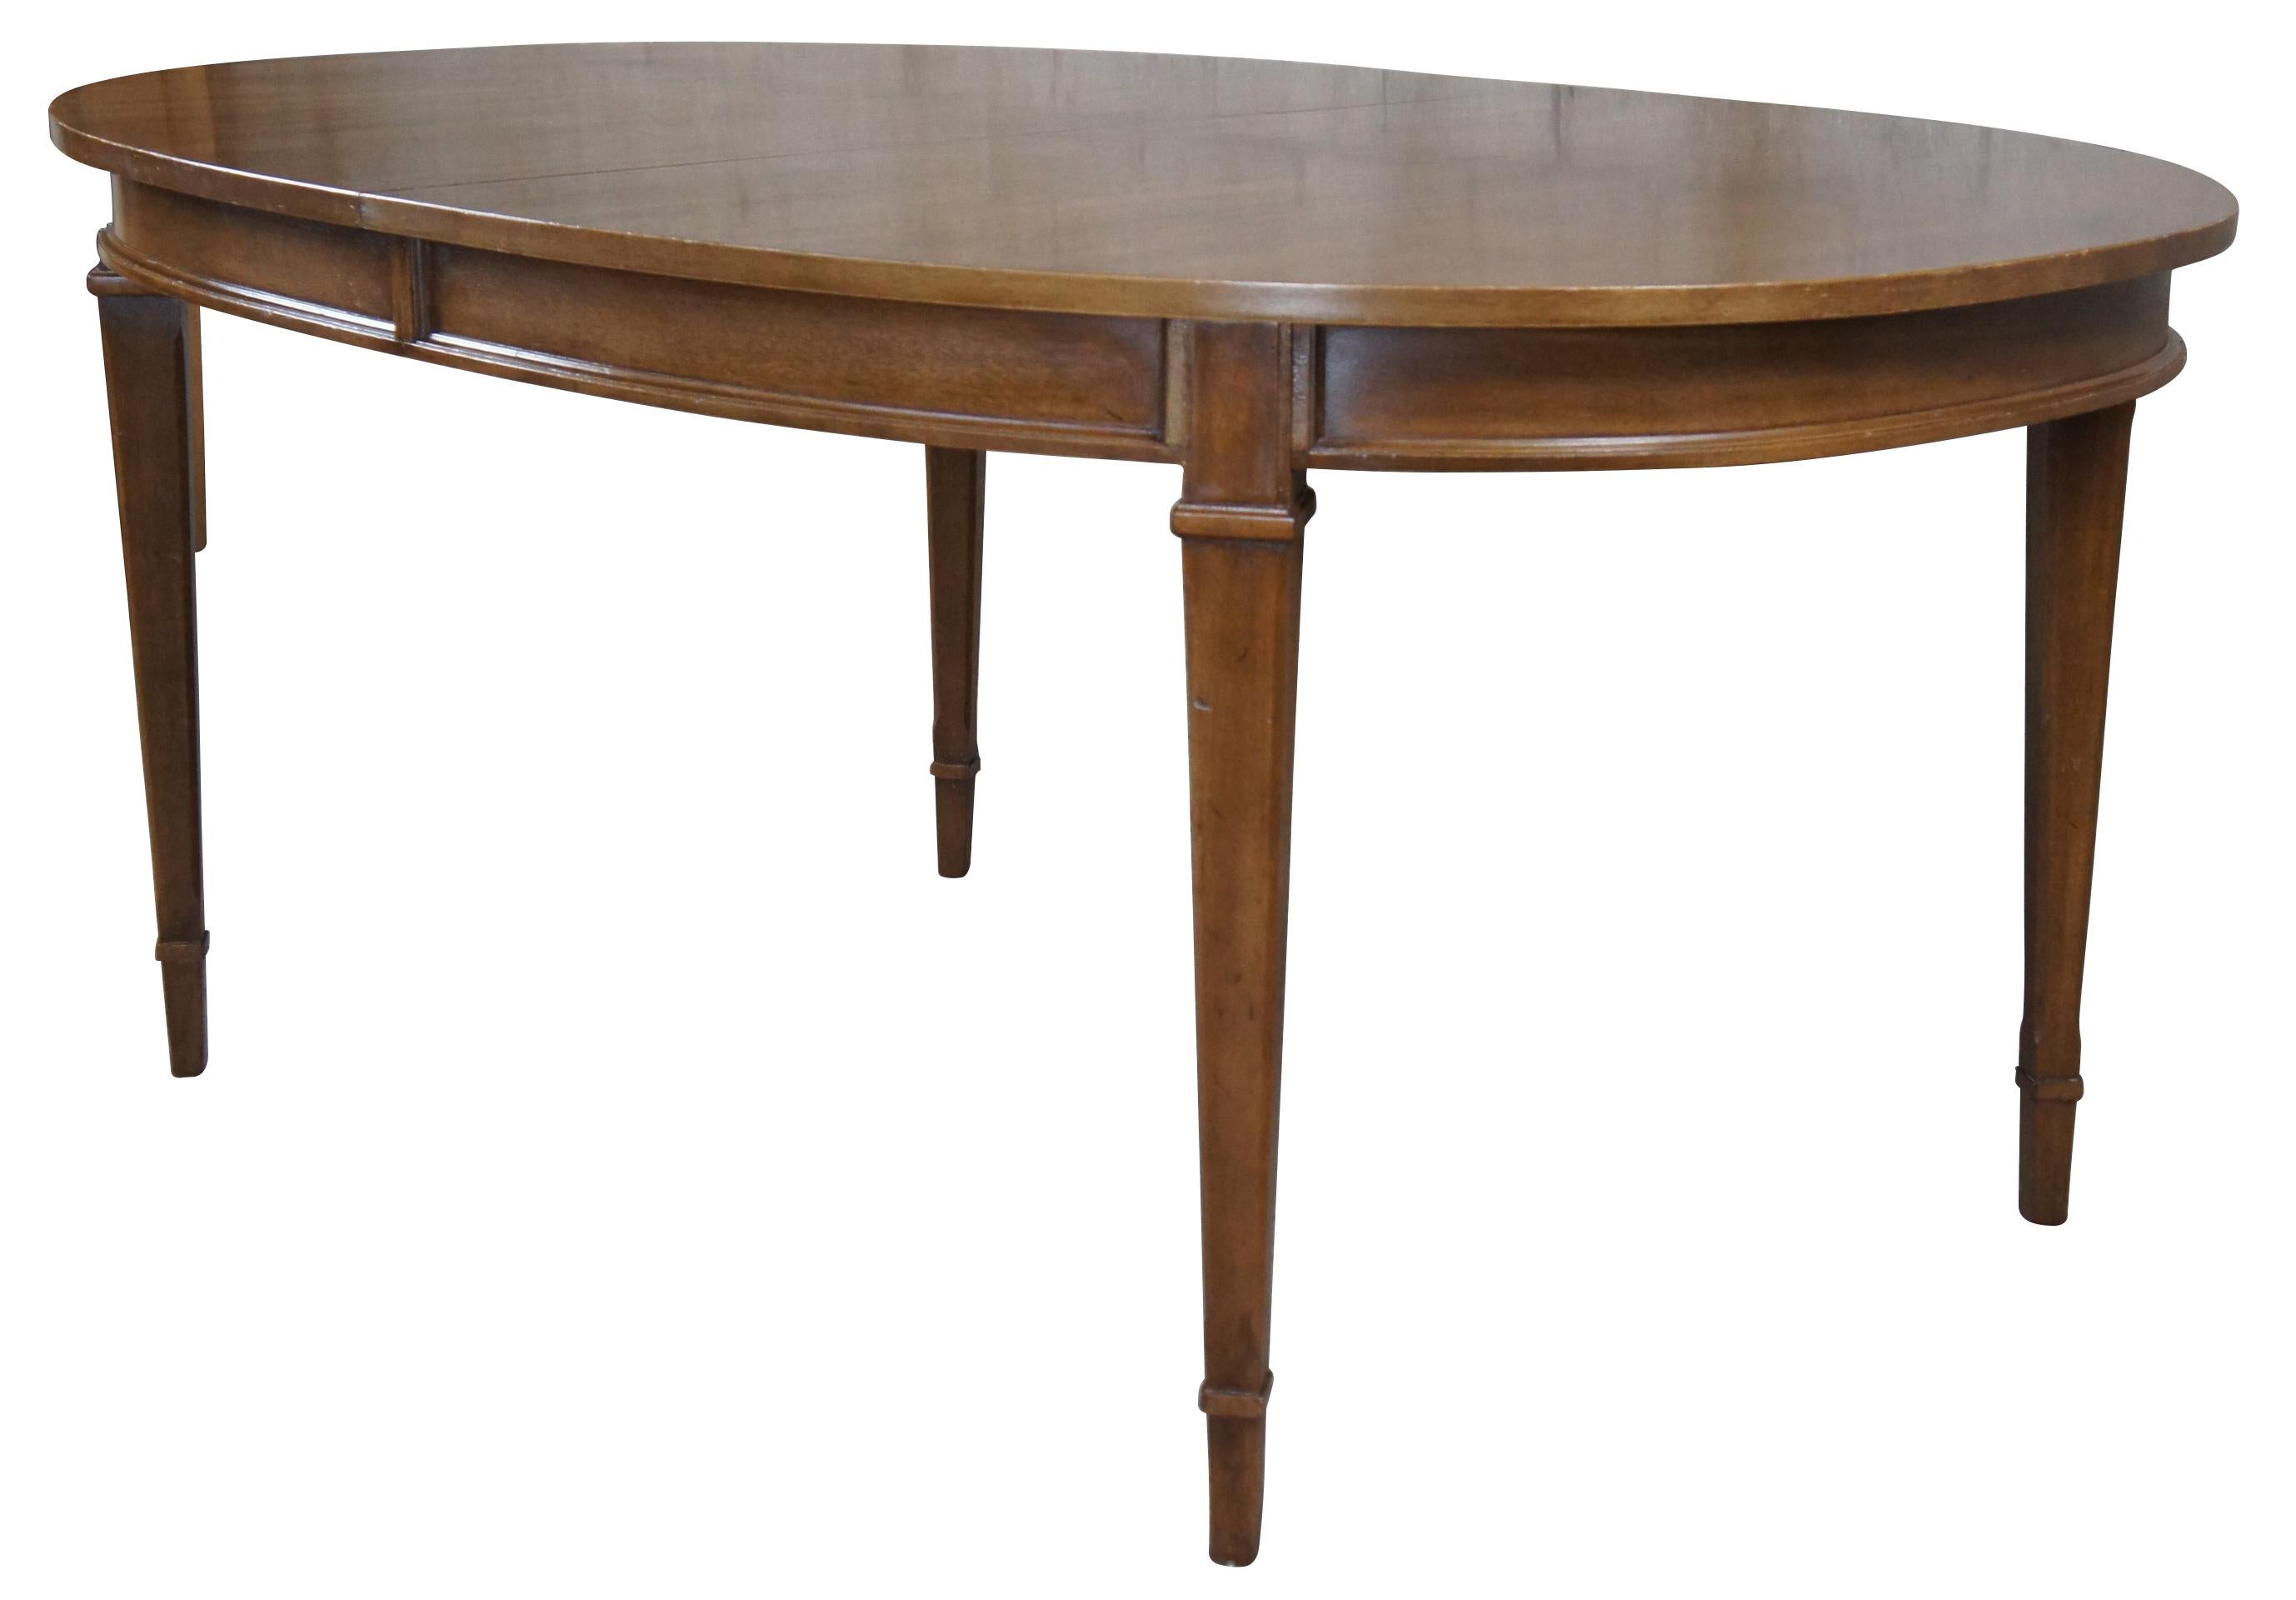 Vintage Drexel Triune dining table. Made of mahogany featuring an oval form, inset panel apron and square tapered legs. Includes 3 table leaf's. circa 1968. 555-333-5.

Dimensions:

44